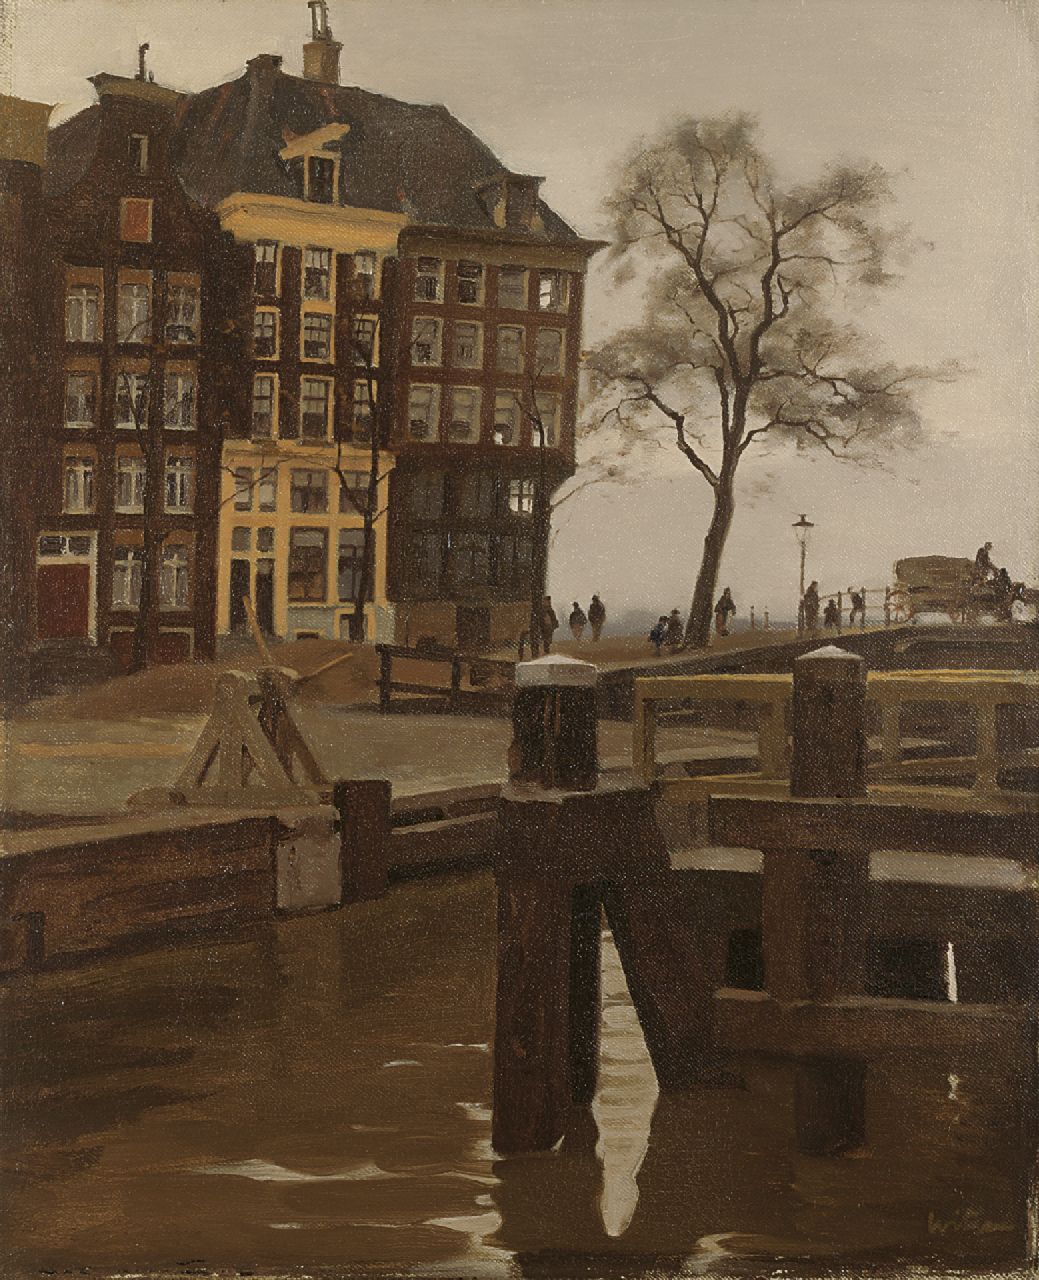 Witsen W.A.  | 'Willem' Arnold Witsen, The corner of the Kalkmarkt and Prins Hendrikkade, Amsterdam, oil on canvas 51.2 x 42.0 cm, signed l.r.